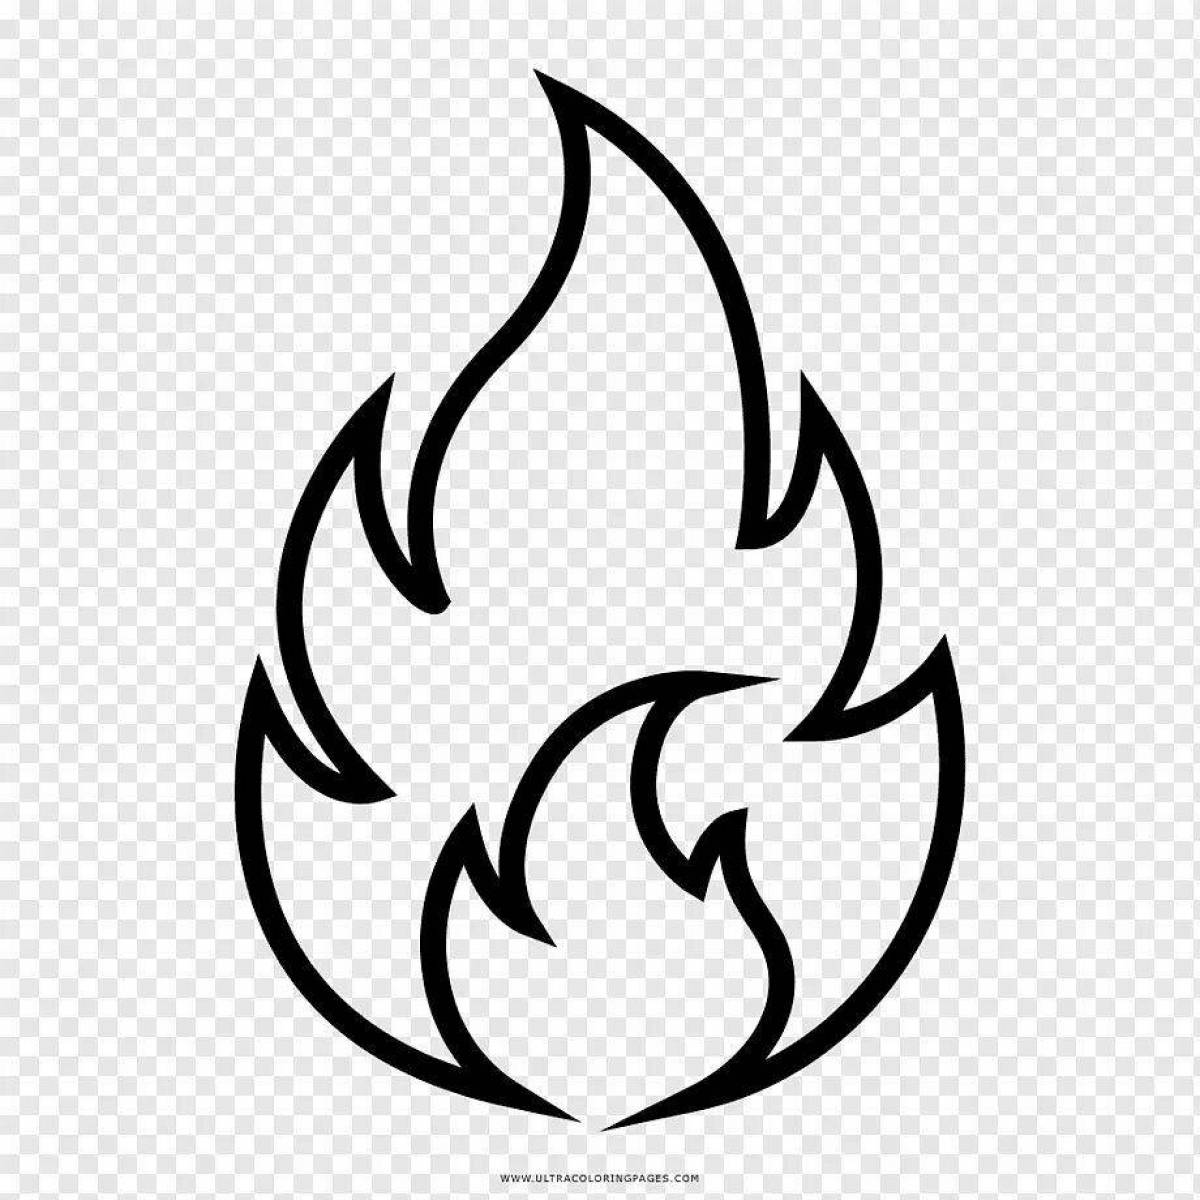 Fire coloring flame